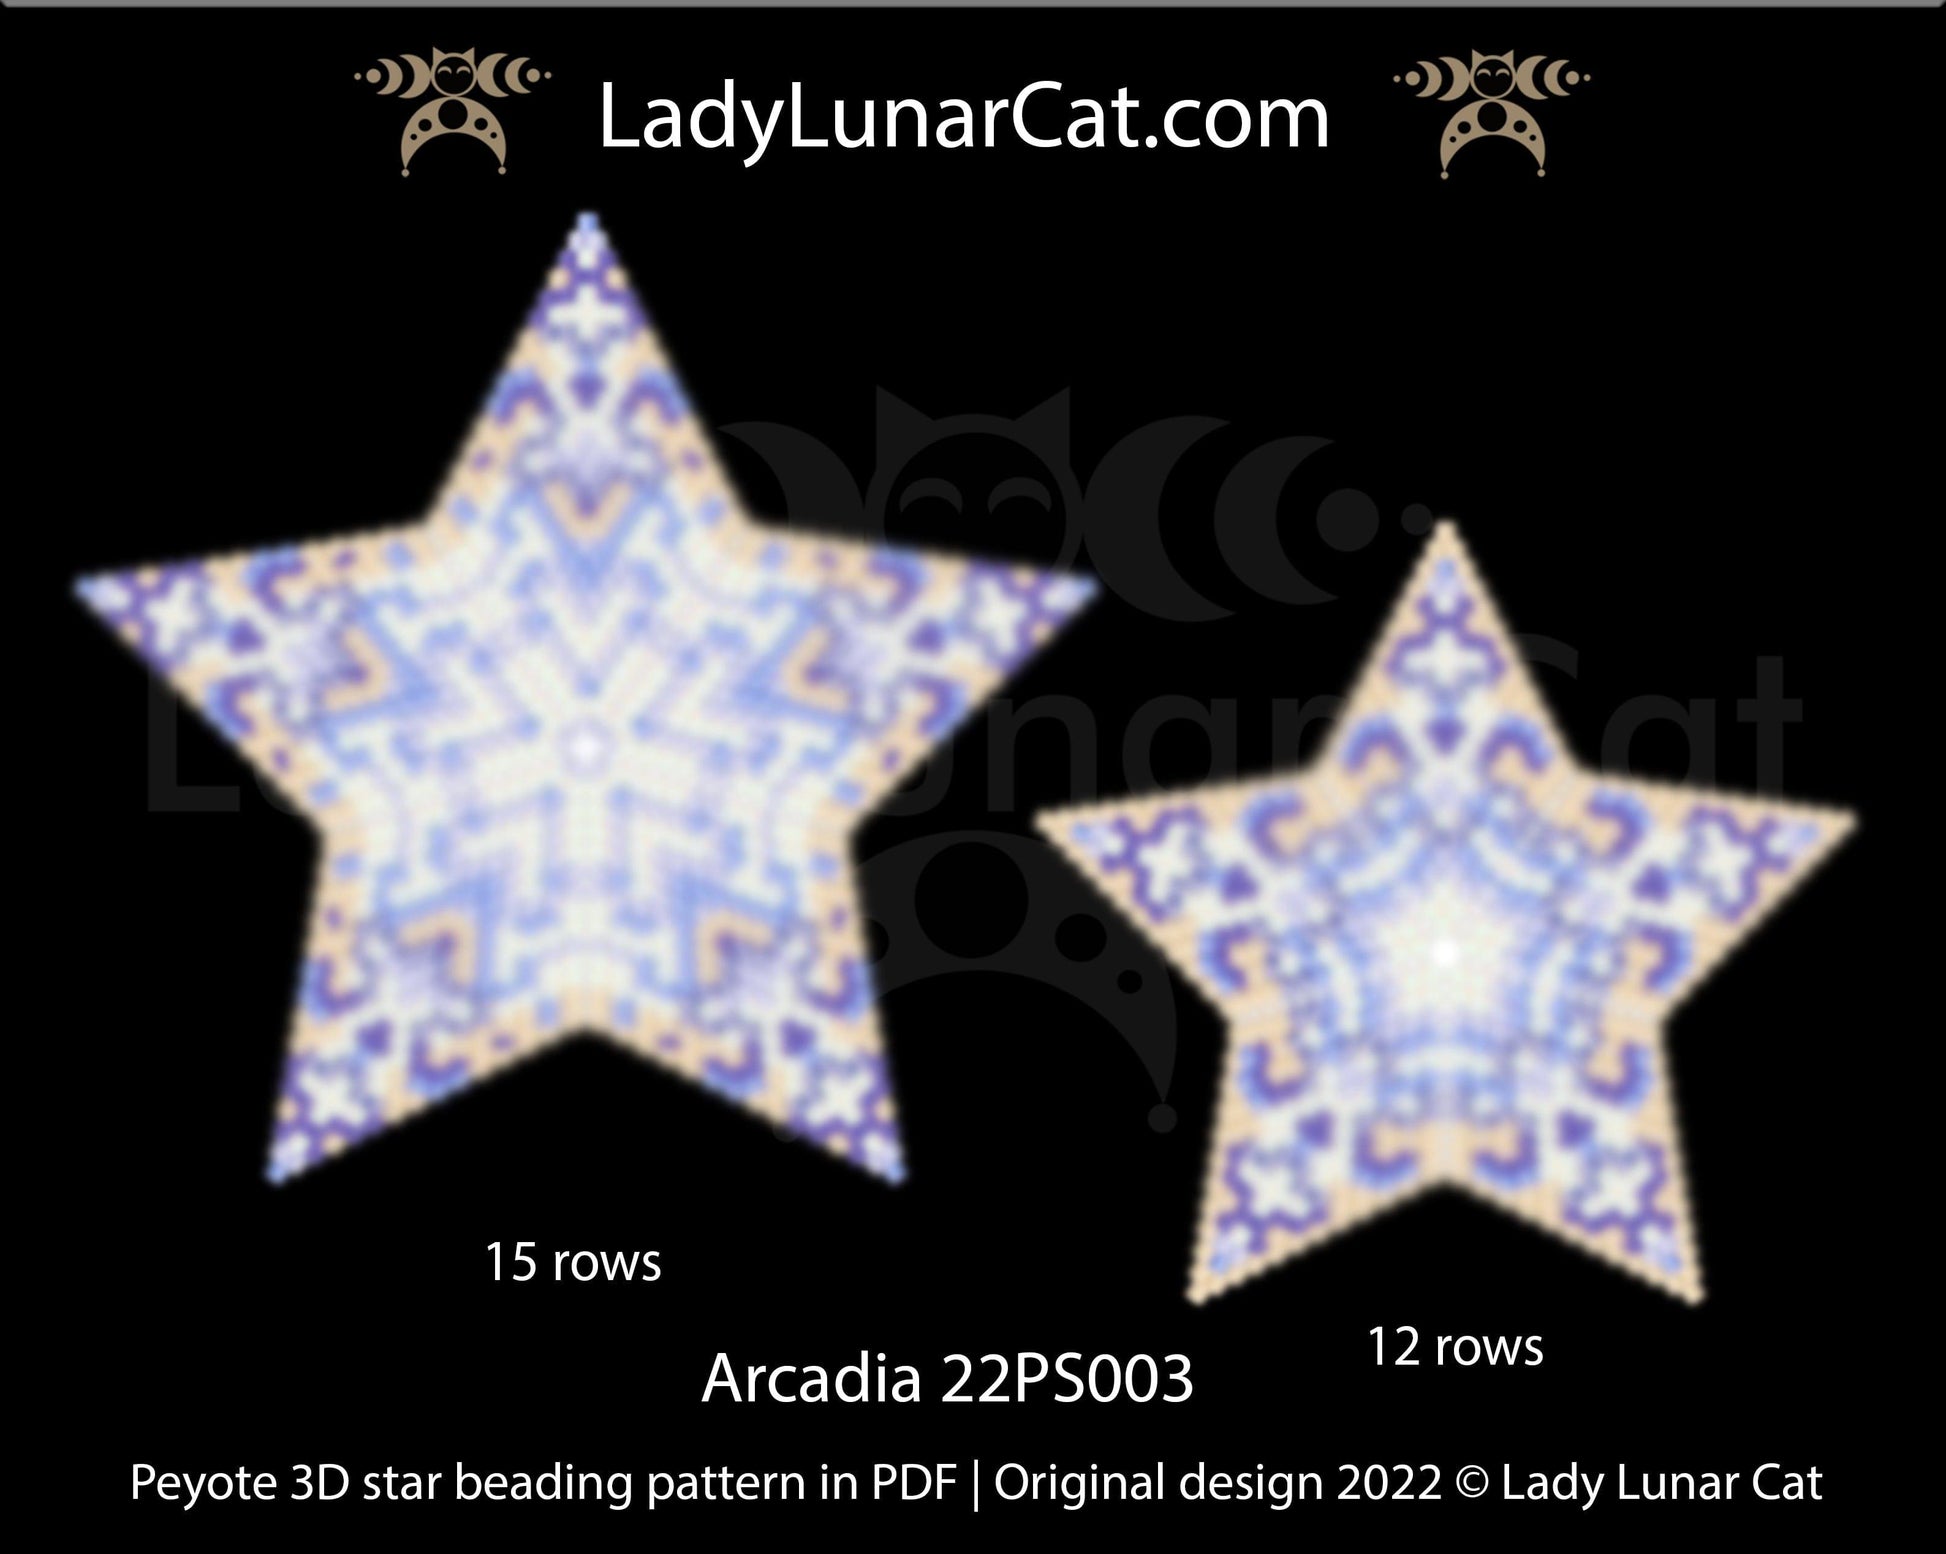 Peyote star pattern for beading - Arcadia 22PS003 15 rows and 12 rows LadyLunarCat